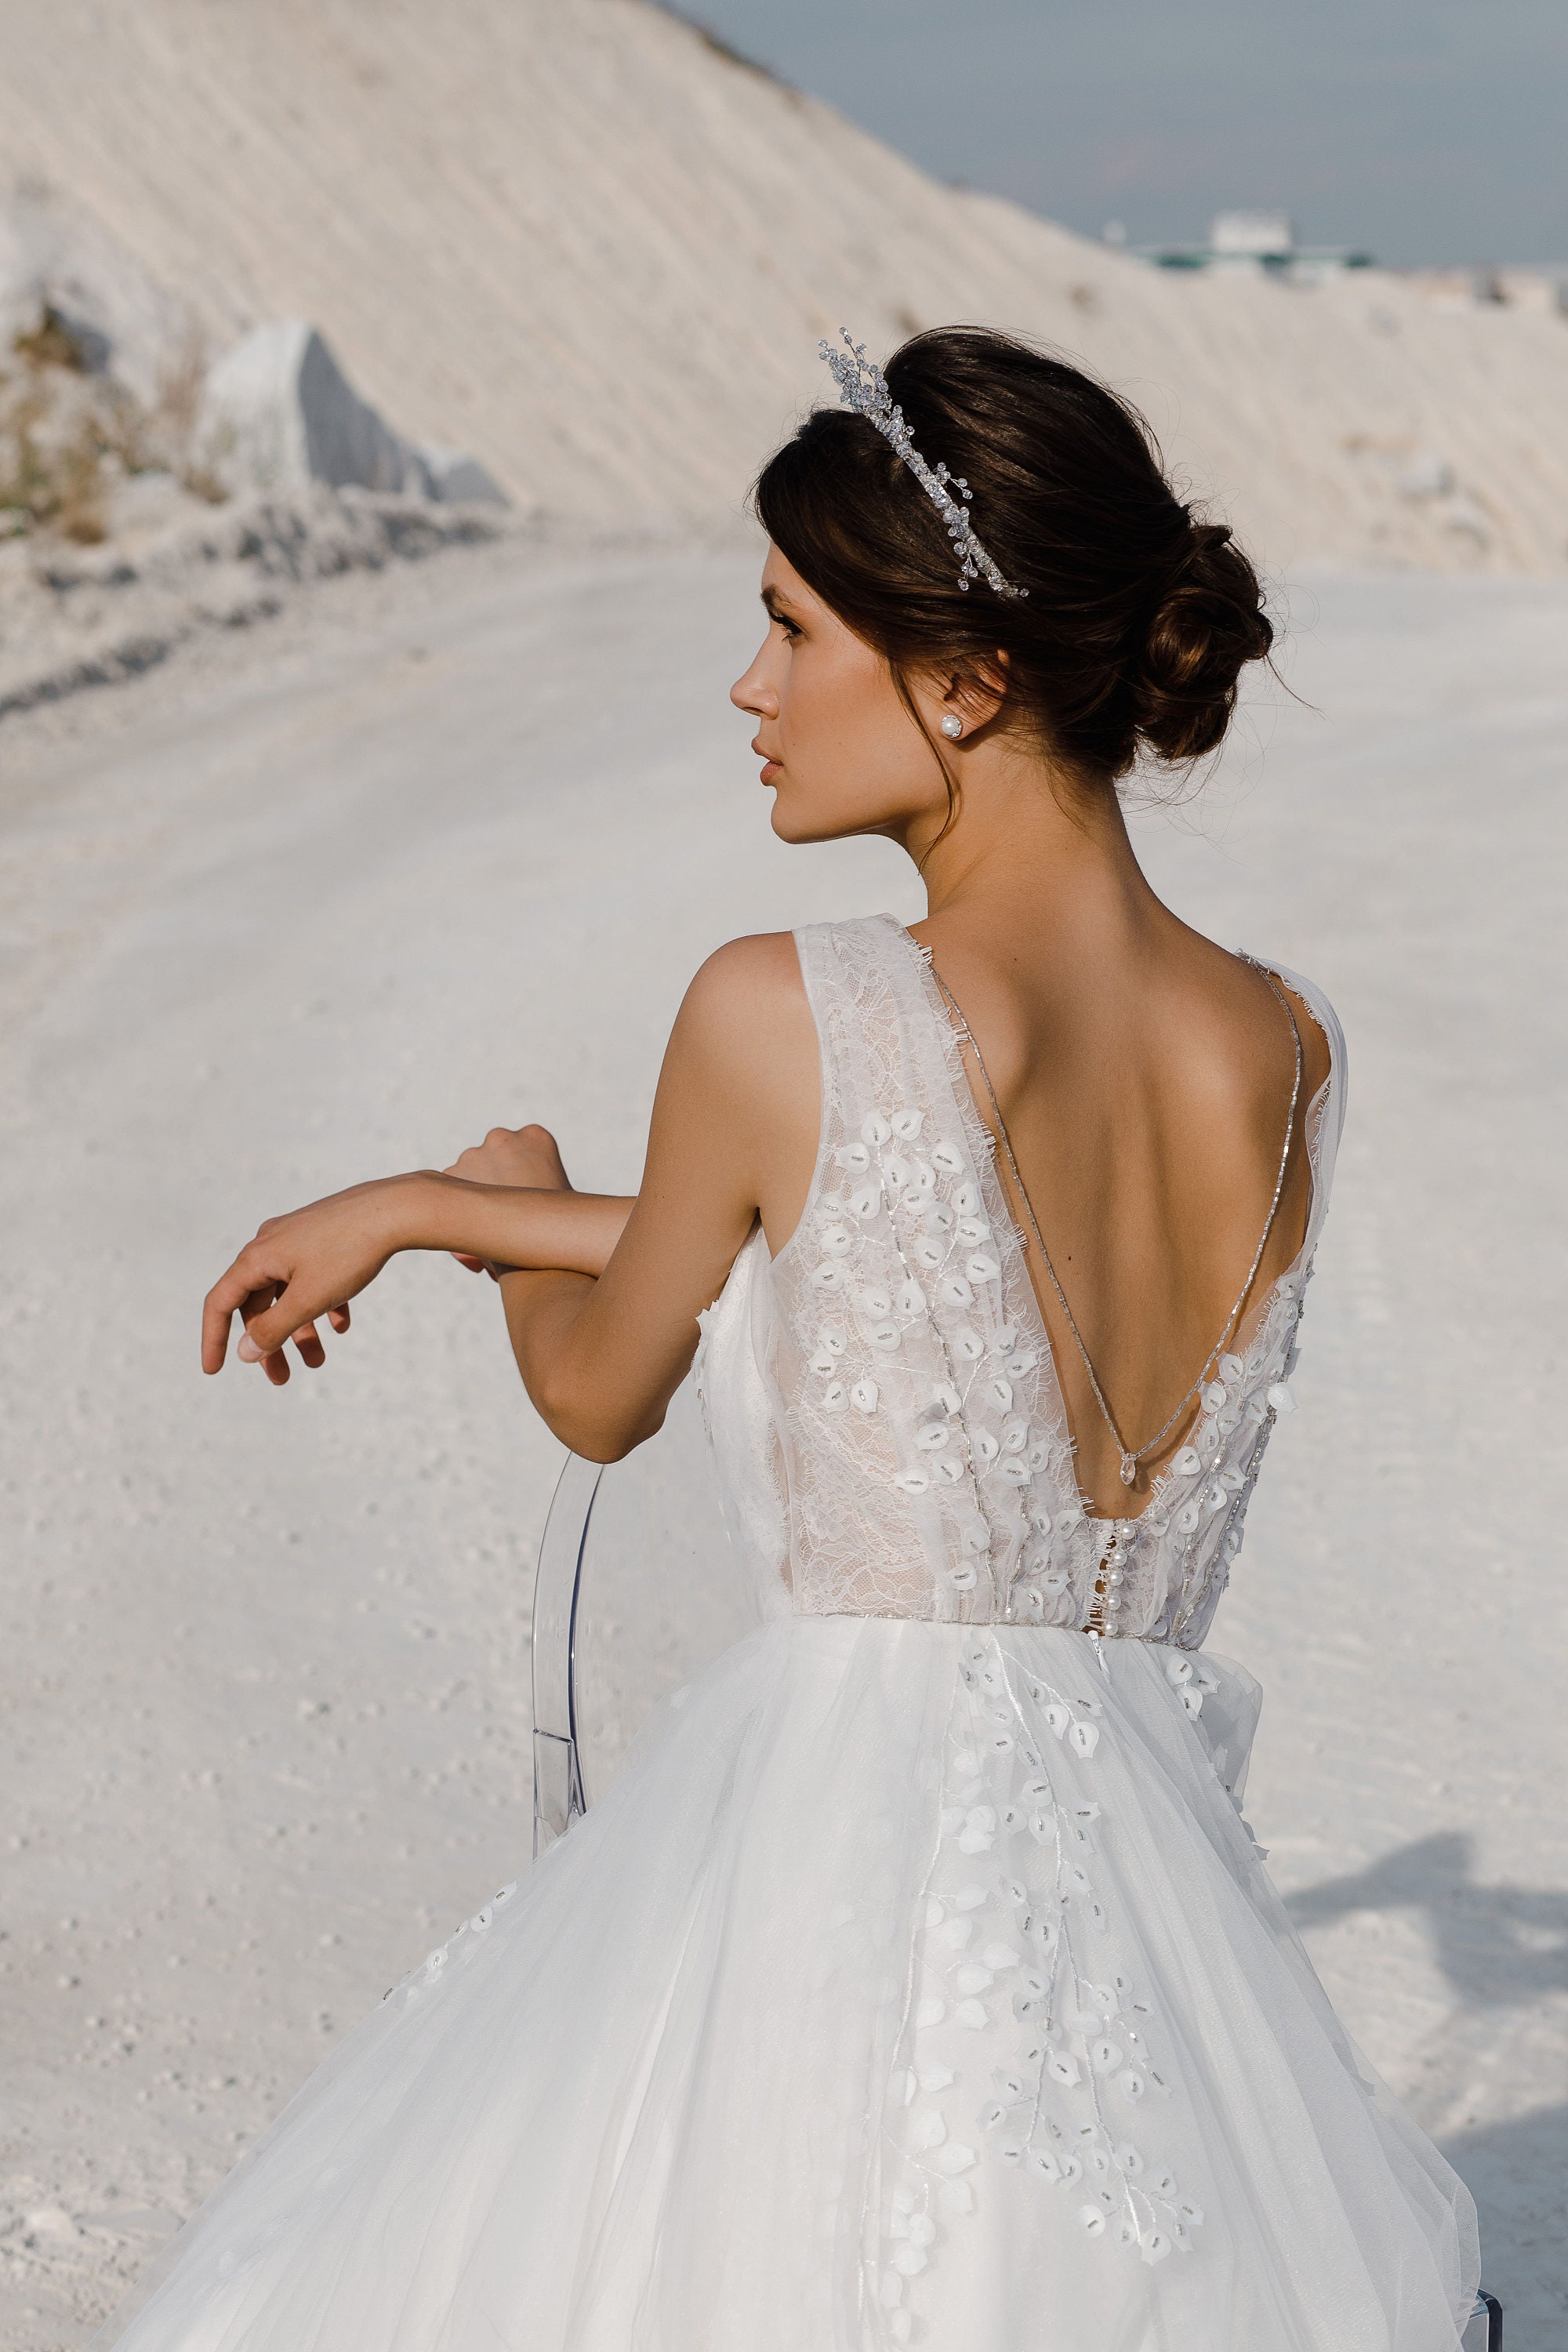 Buy Backless Lace Wedding Dress Online In India -  India